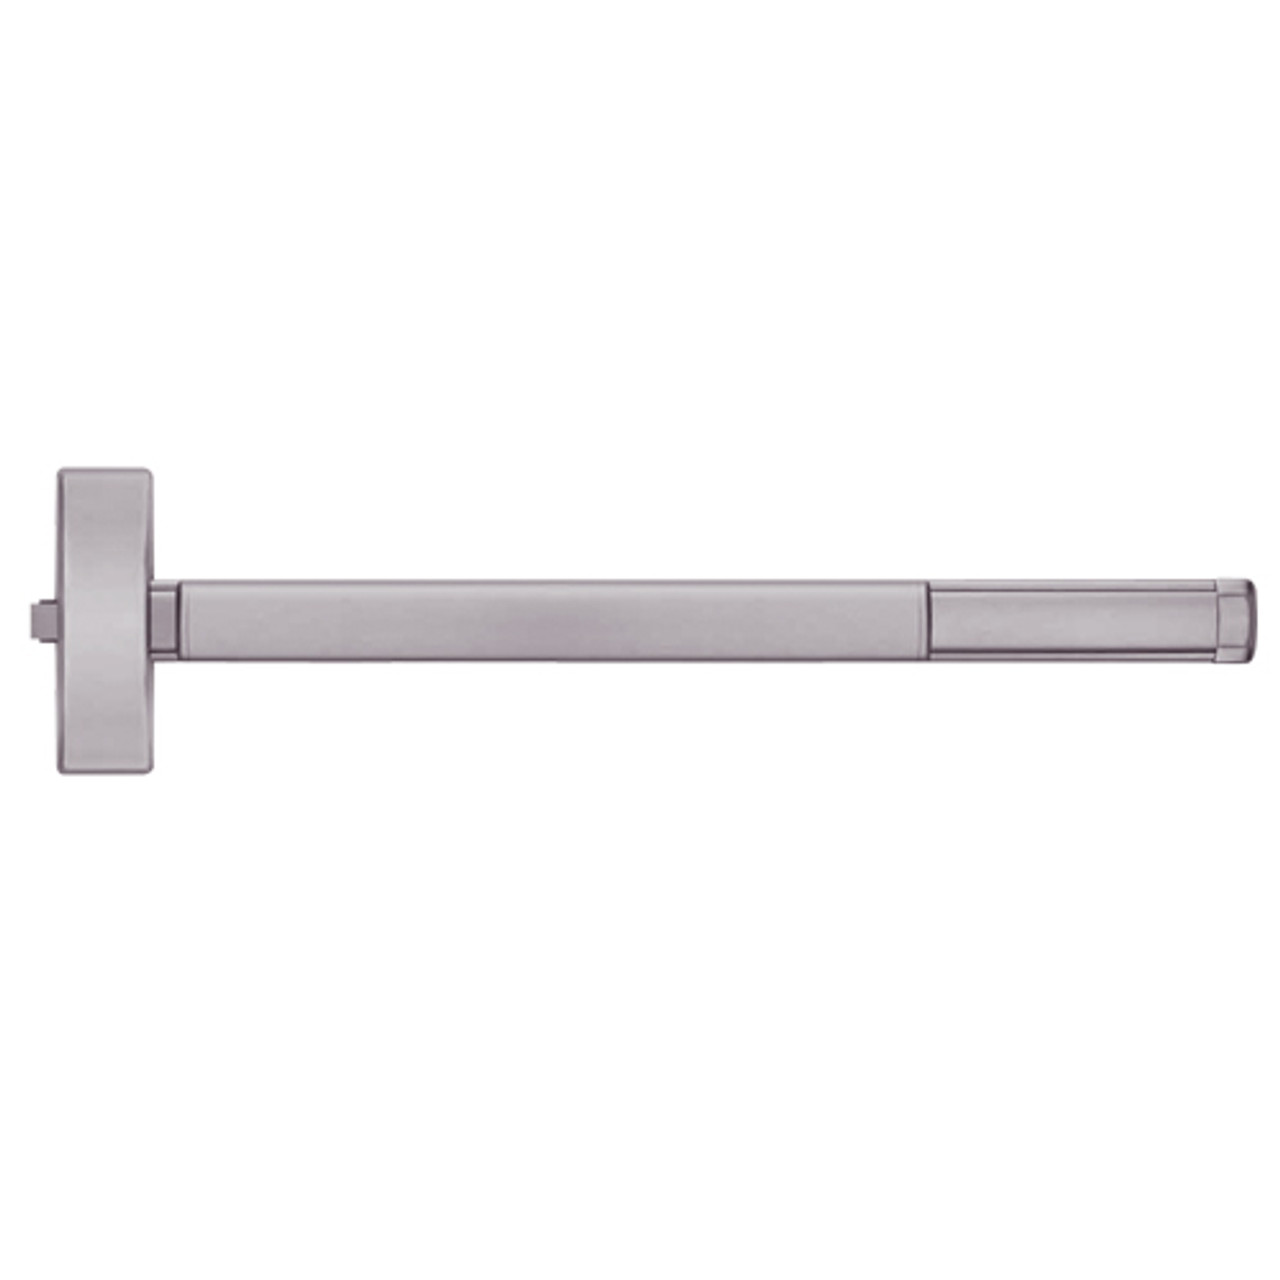 TSFL2114-630-48 PHI 2100 Series Fire Rated Apex Rim Exit Device with Touchbar Monitoring Switch Prepped for Lever-Knob Always Active in Satin Stainless Steel Finish